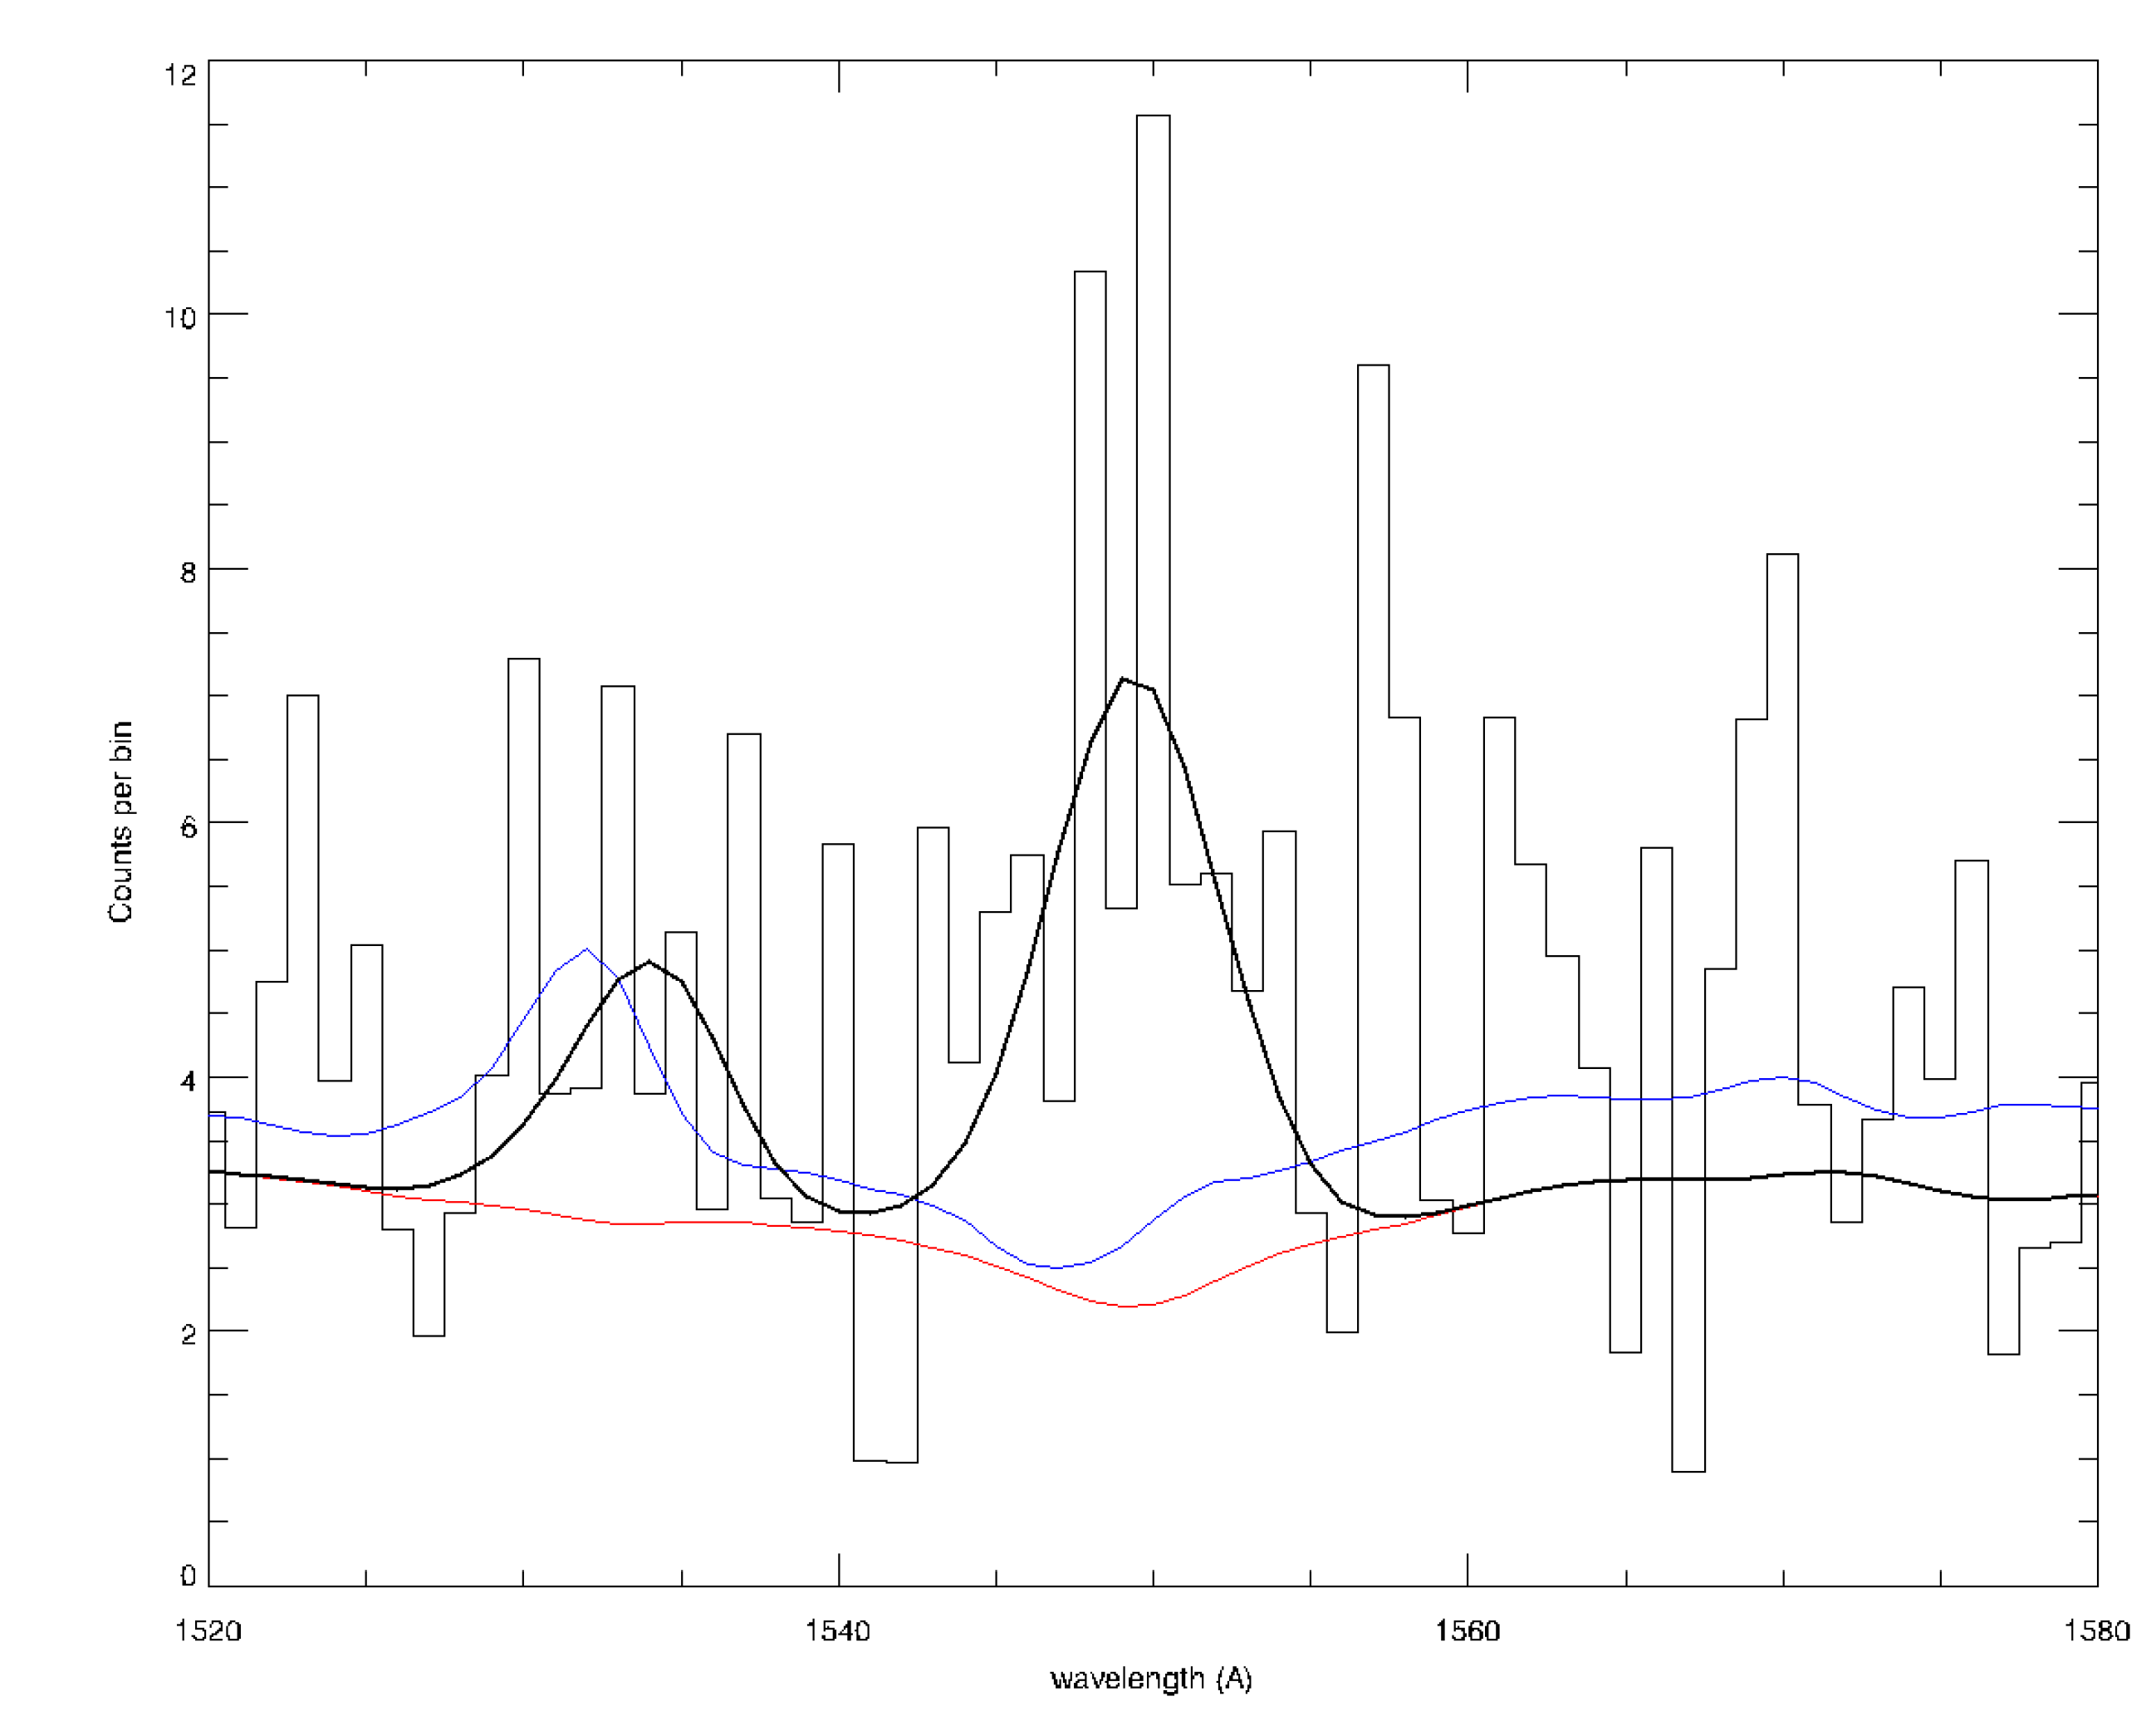 Noisy spectrum in a 60 Angstrom range with overlayed models. There are two emission features in the best fit model, one in the blue line model, and the red line is mostly flat.